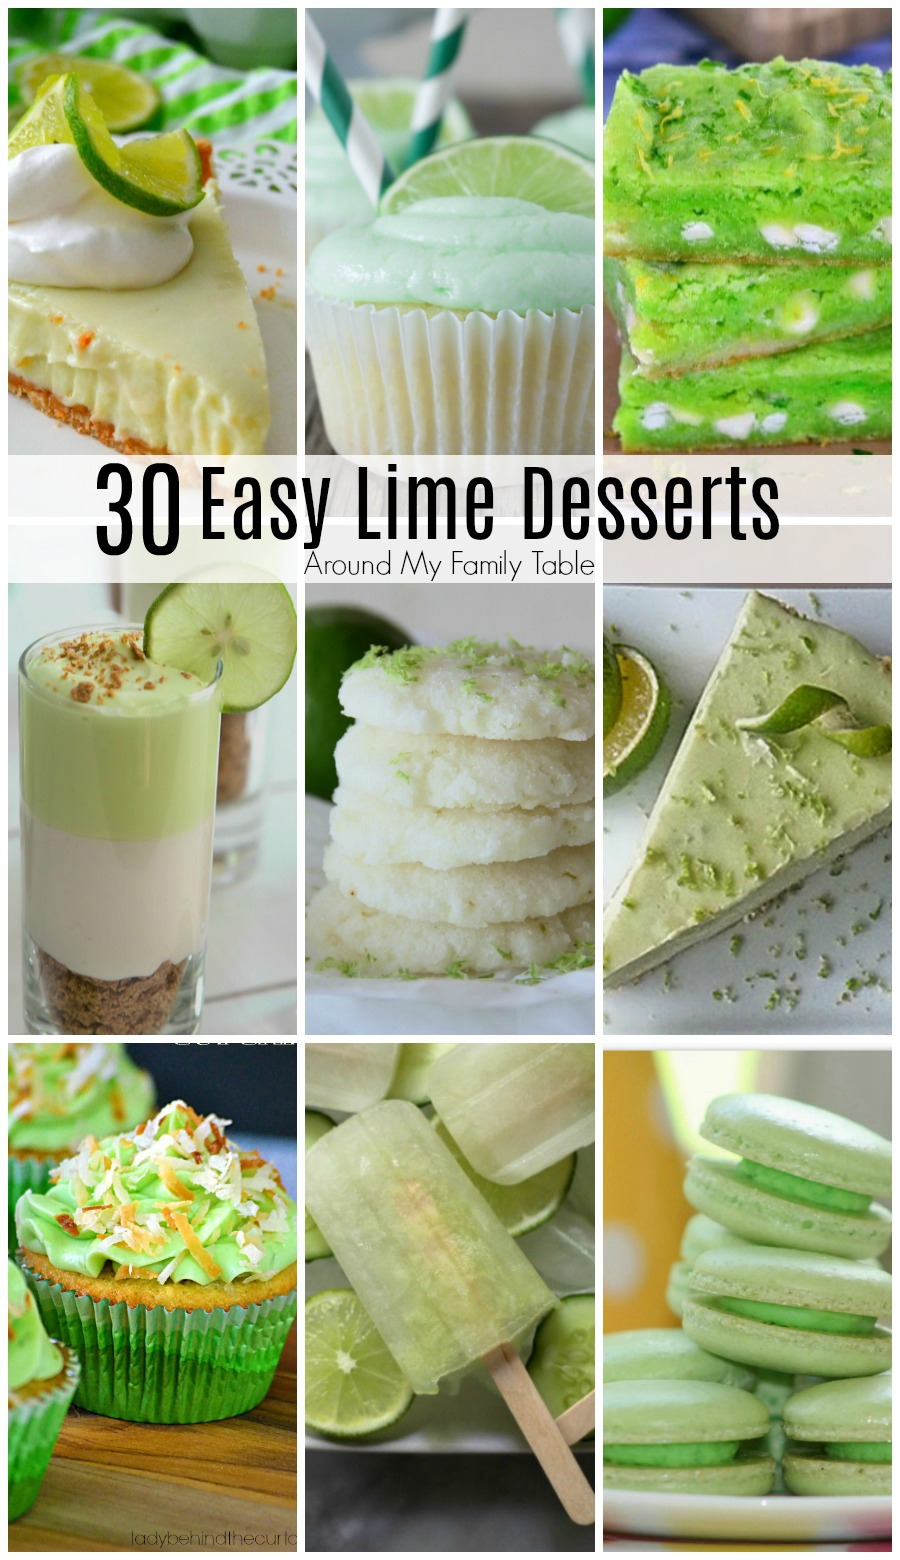 These 30 easy lime desserts are sure to hit the spot this summer when you crave a cool treat.